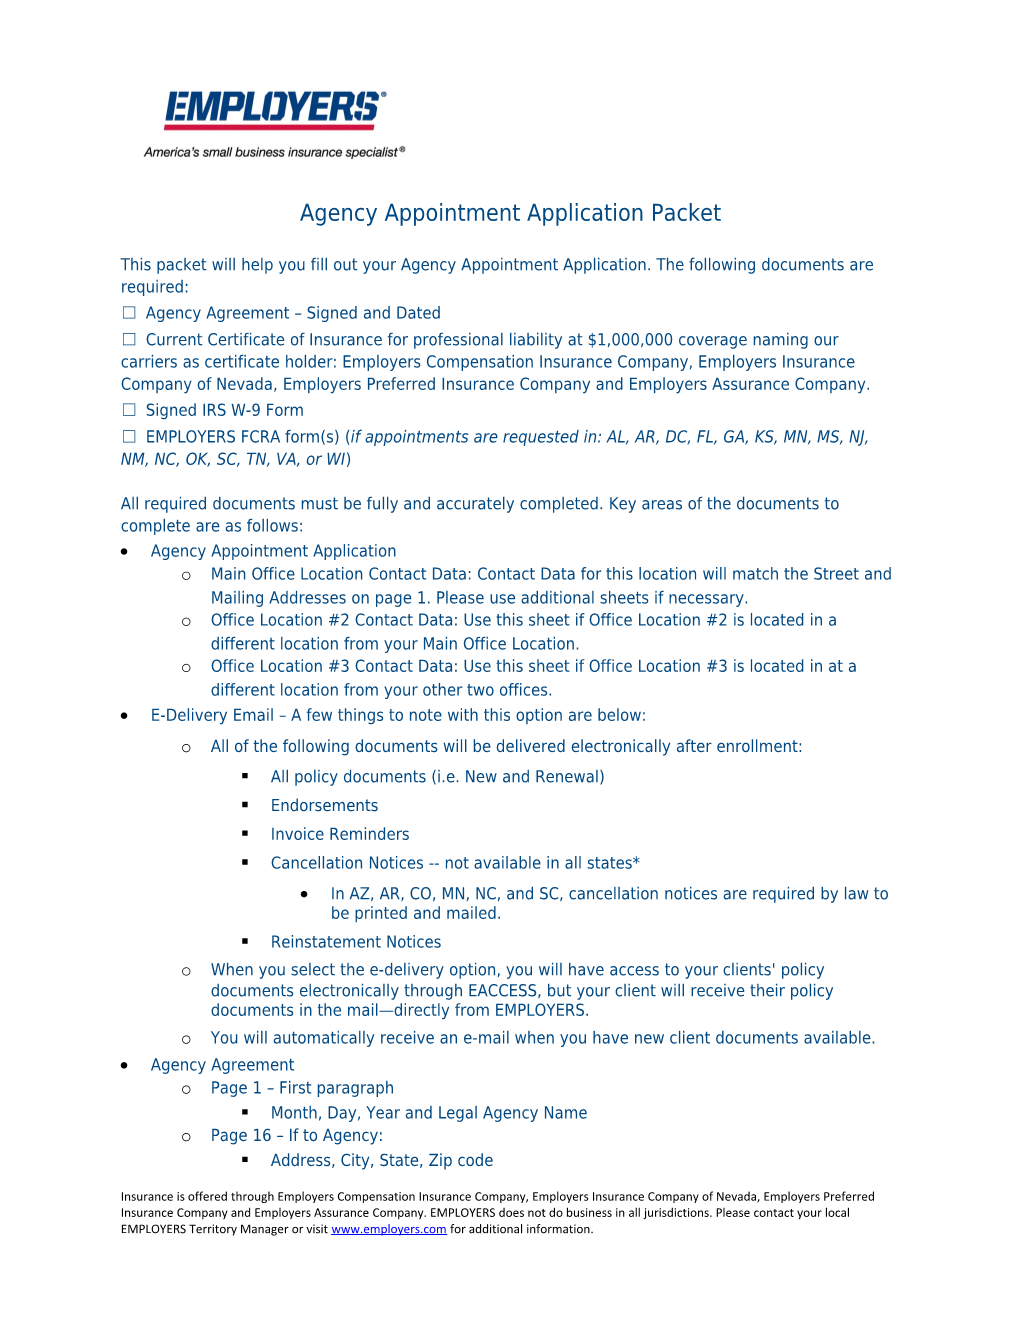 Agency Appointment Application Packet